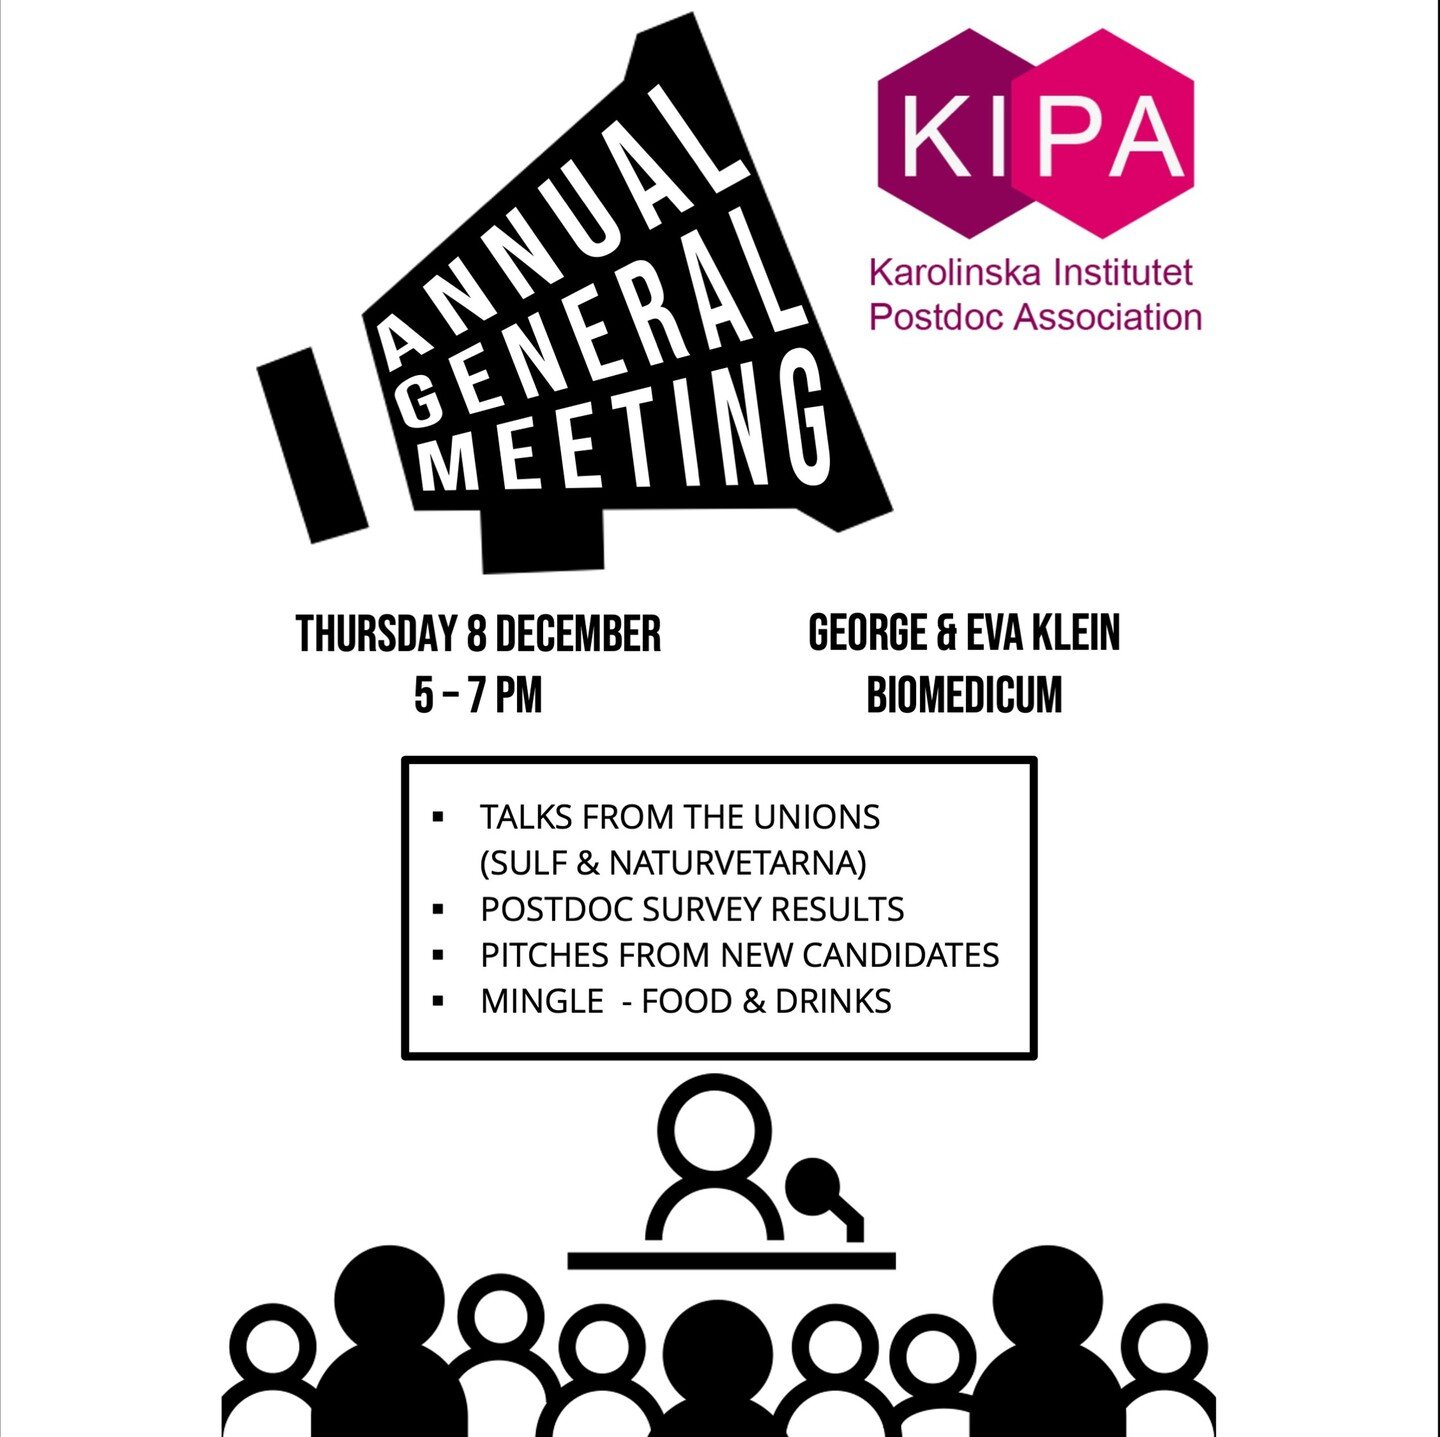 KIPA's Annual General Meeting is coming up soon!

We will have speakers from 3 invited unions - @akademikerna Saco, SULF, and @naturvetarna. Followed by a presentation from our chair and vice-chairs on KIPA&rsquo;s activities and postdoc survey resul